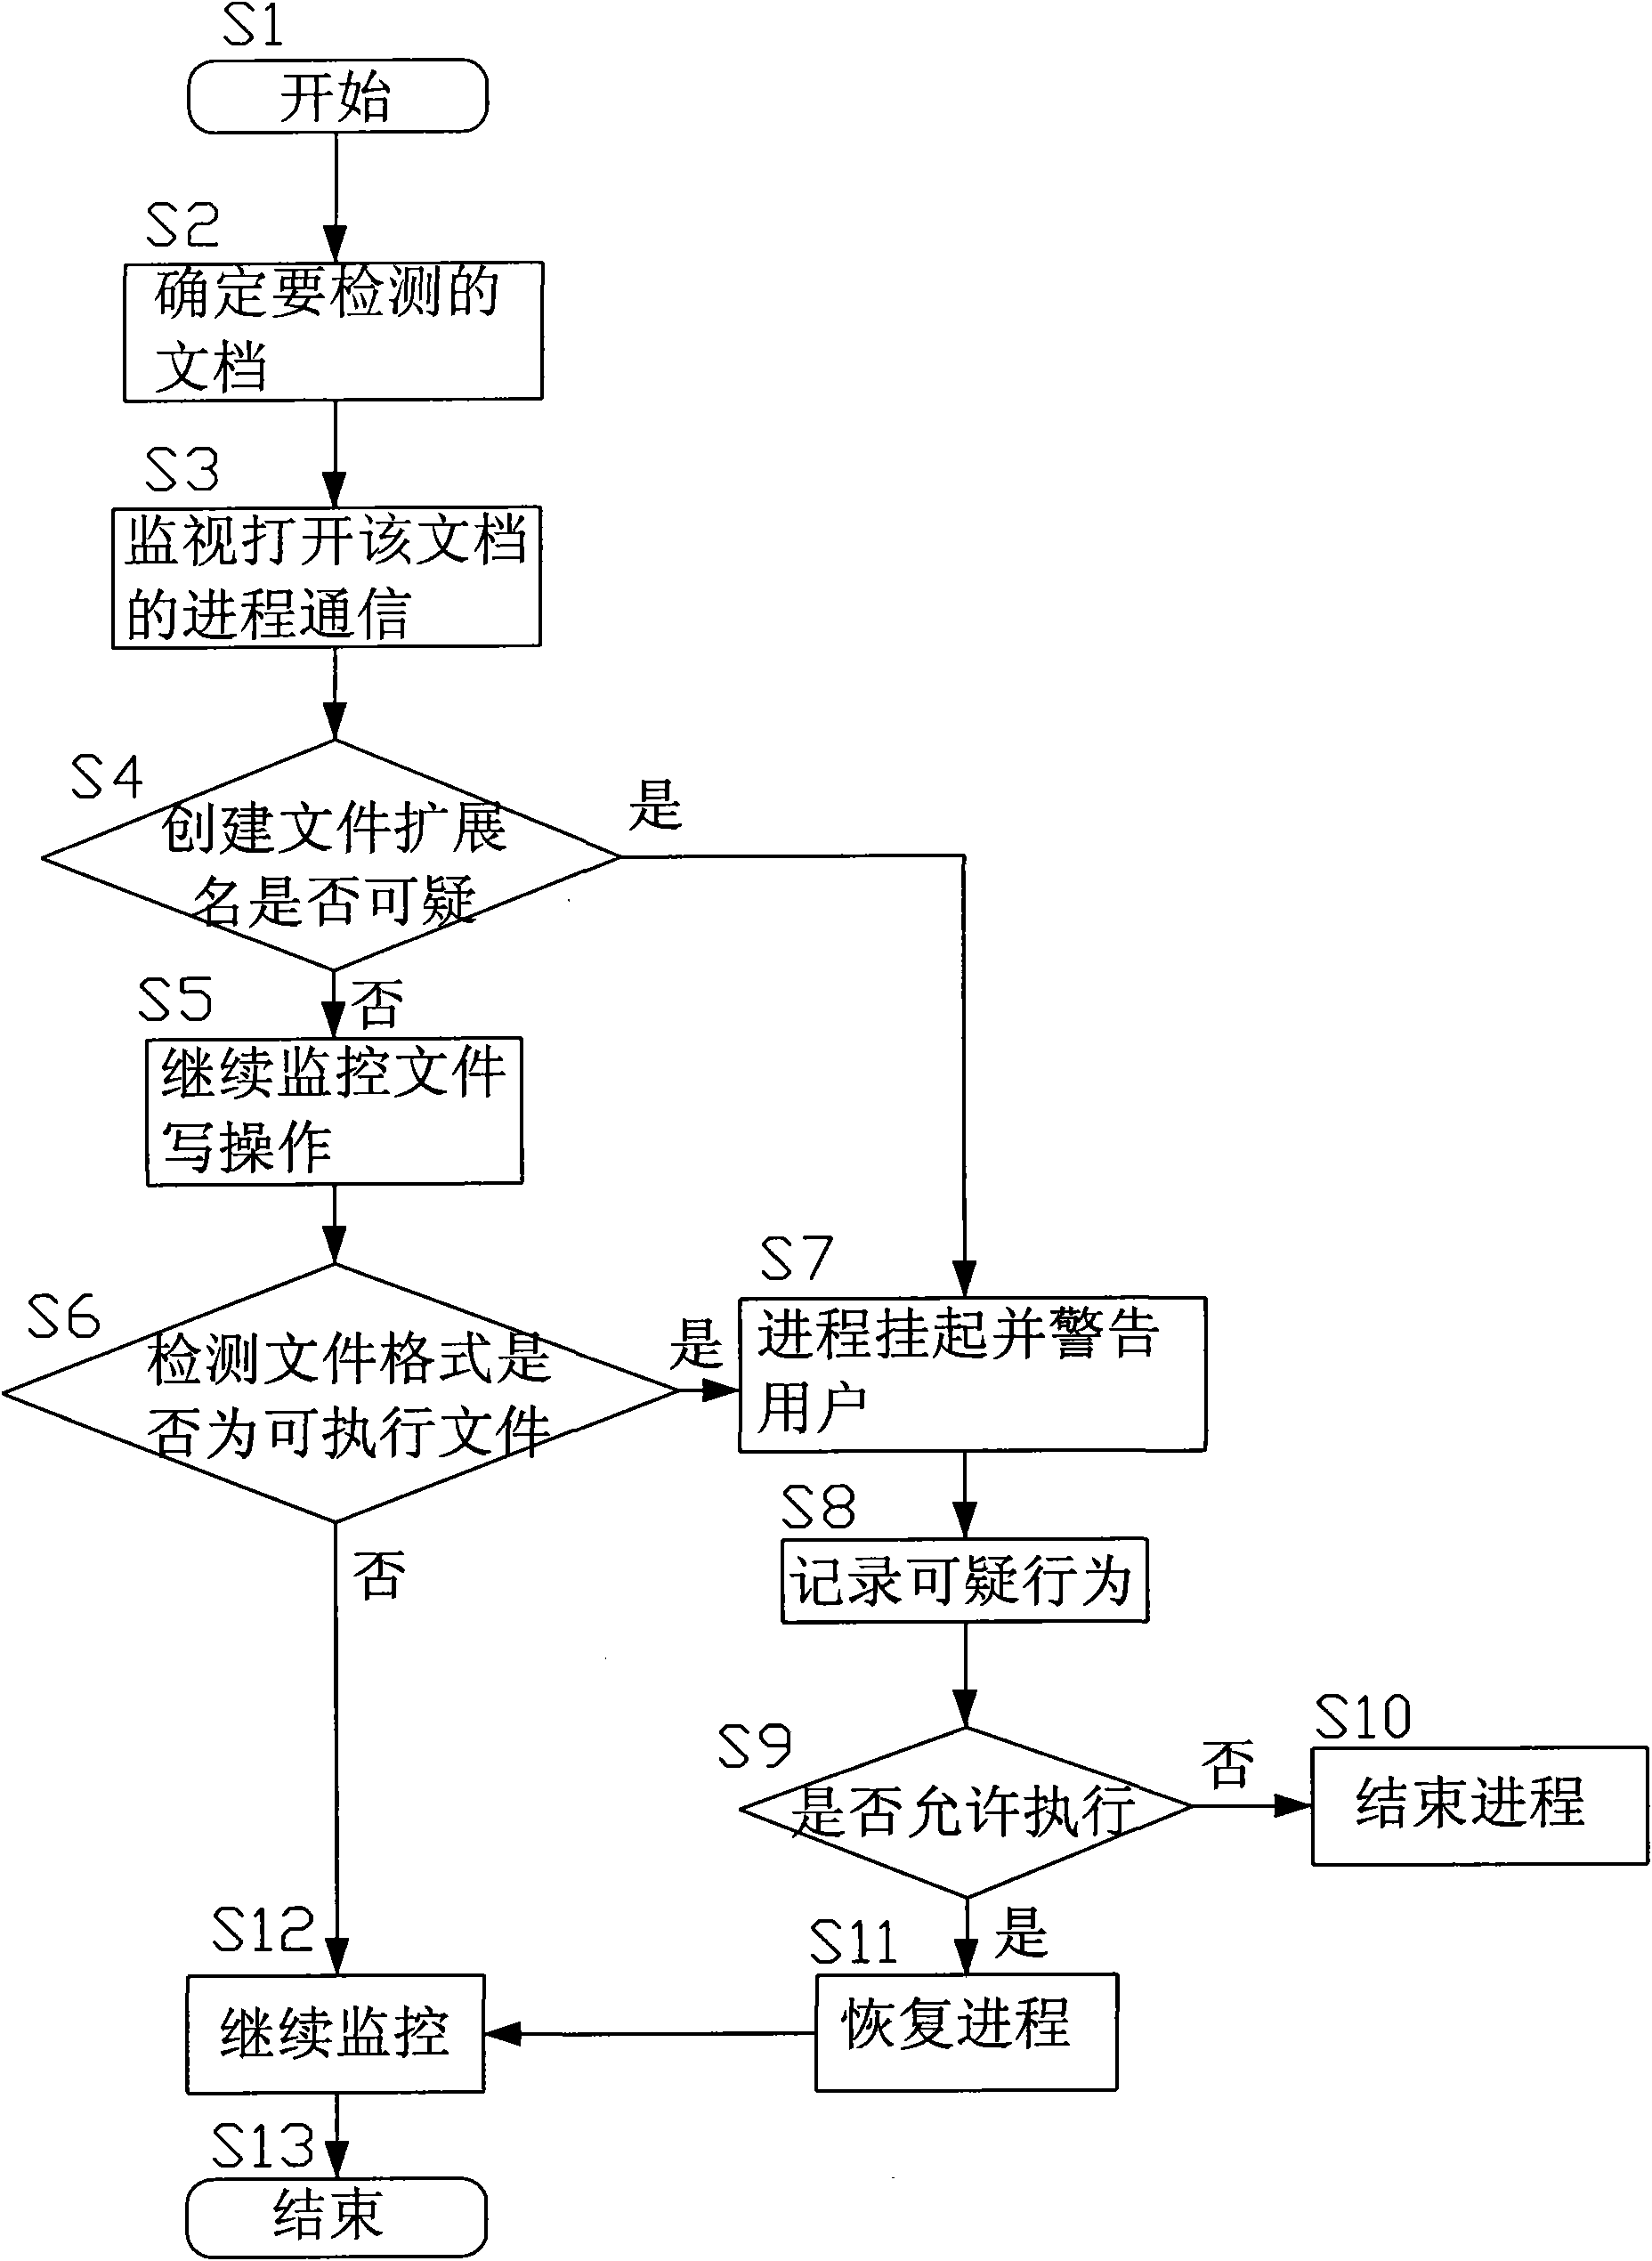 Method and device for detecting Trojan in non-executable file